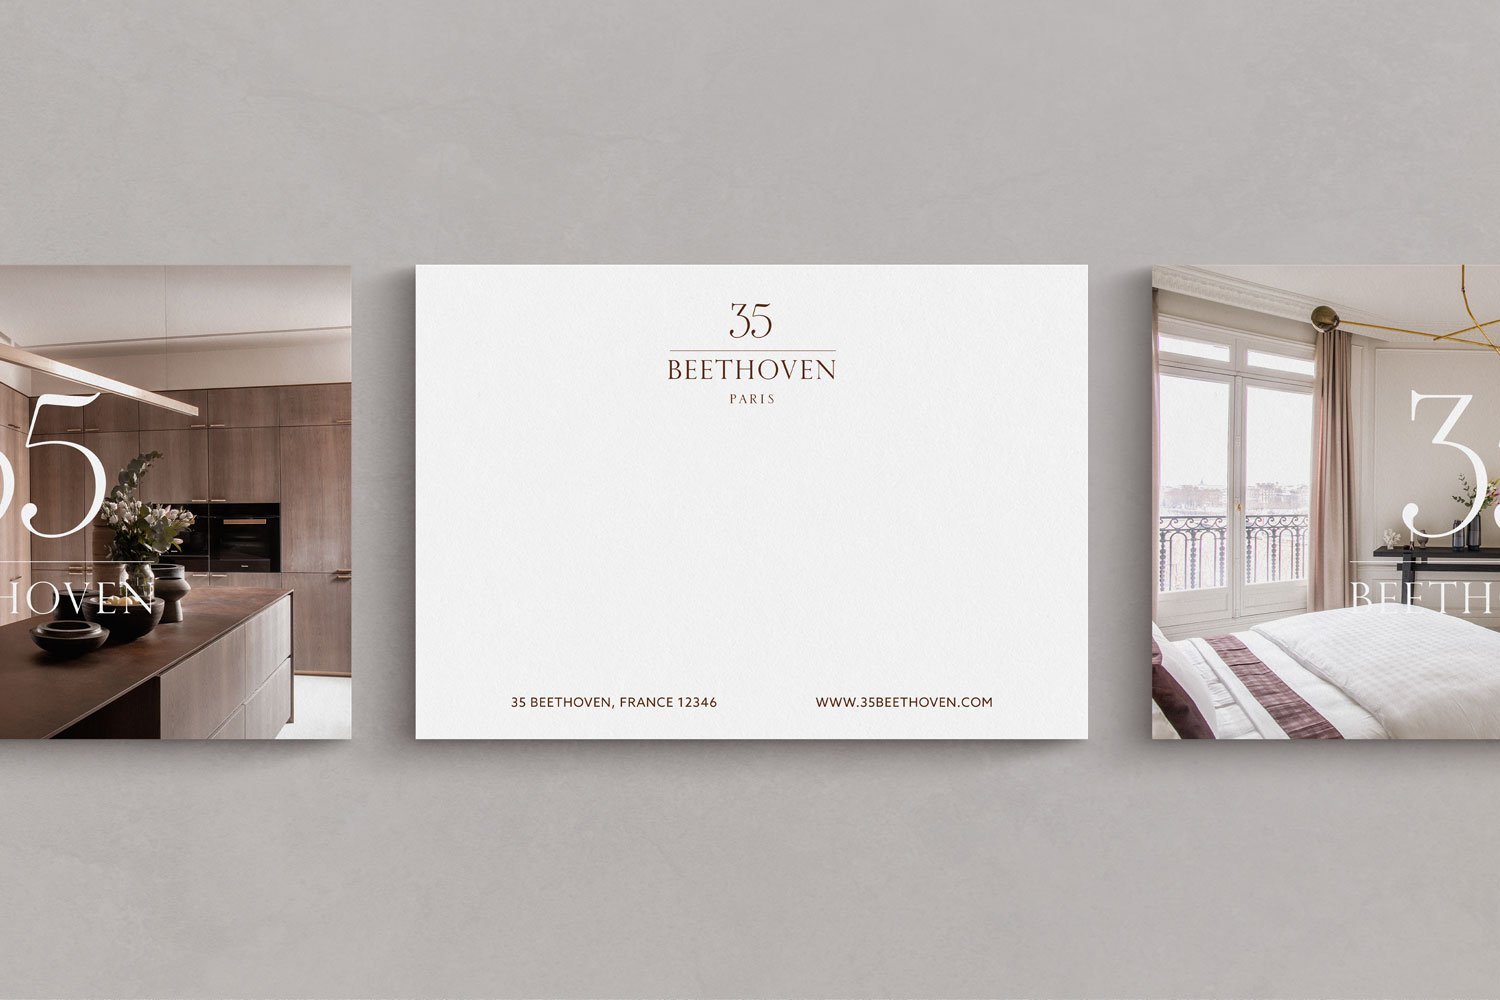   frenchCALIFORNIA is a   globally minded interior   design and branding studio  